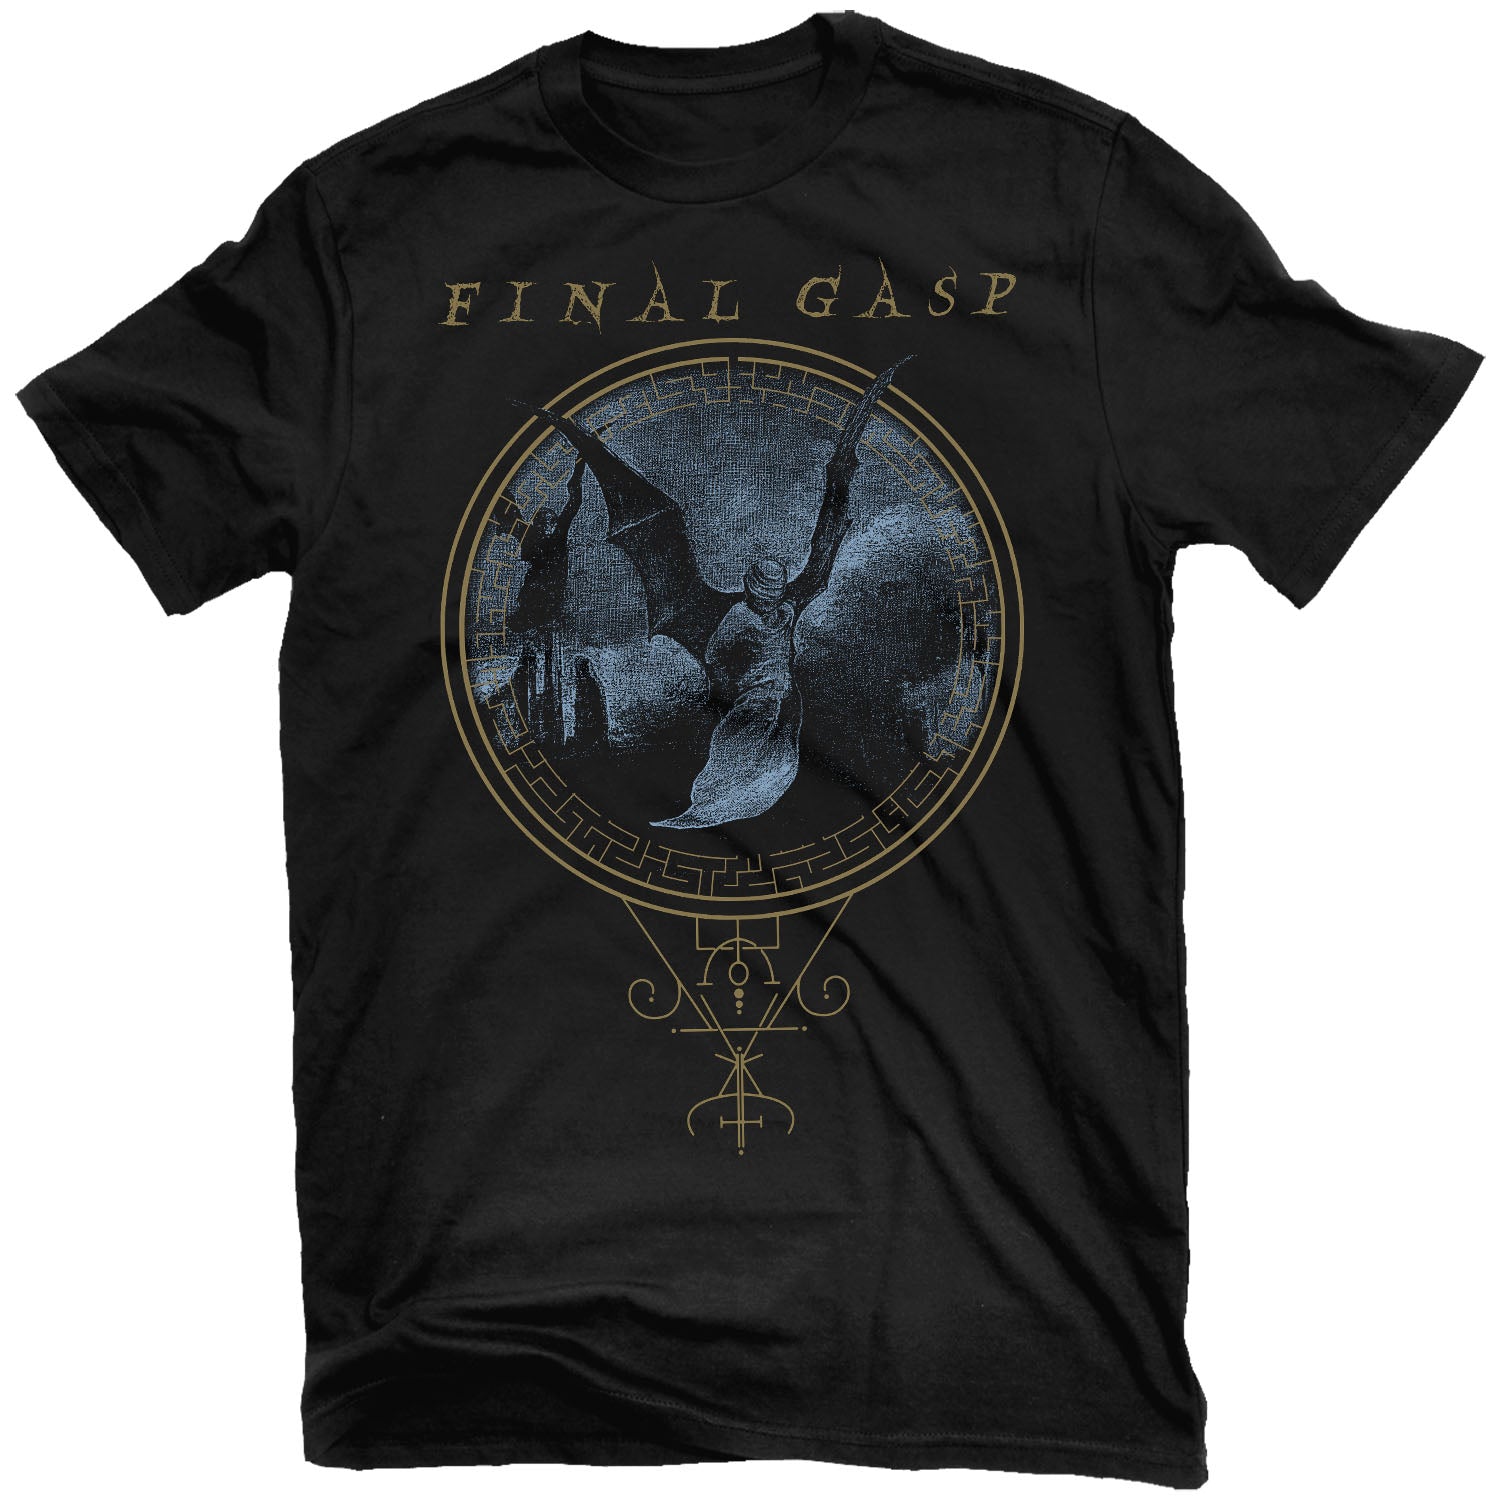 Final Gasp "Mourning Moon" T-Shirt